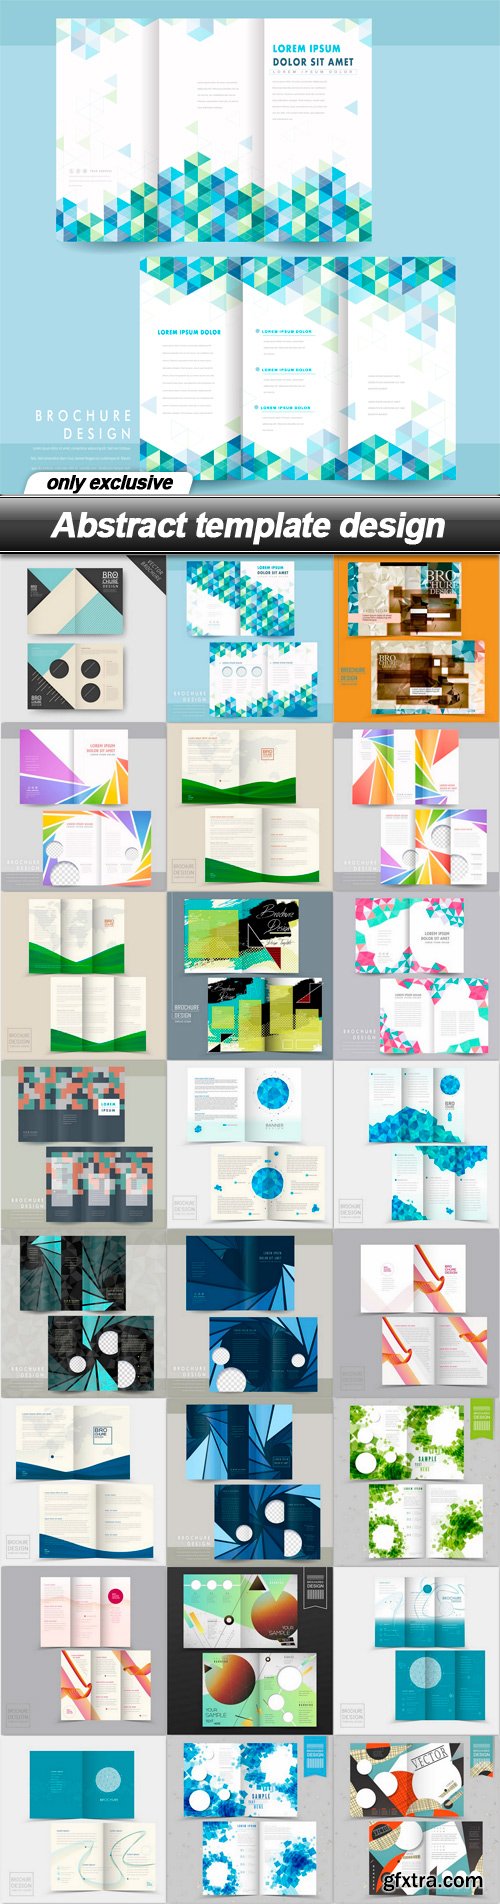 Abstract template design - 25 EPS